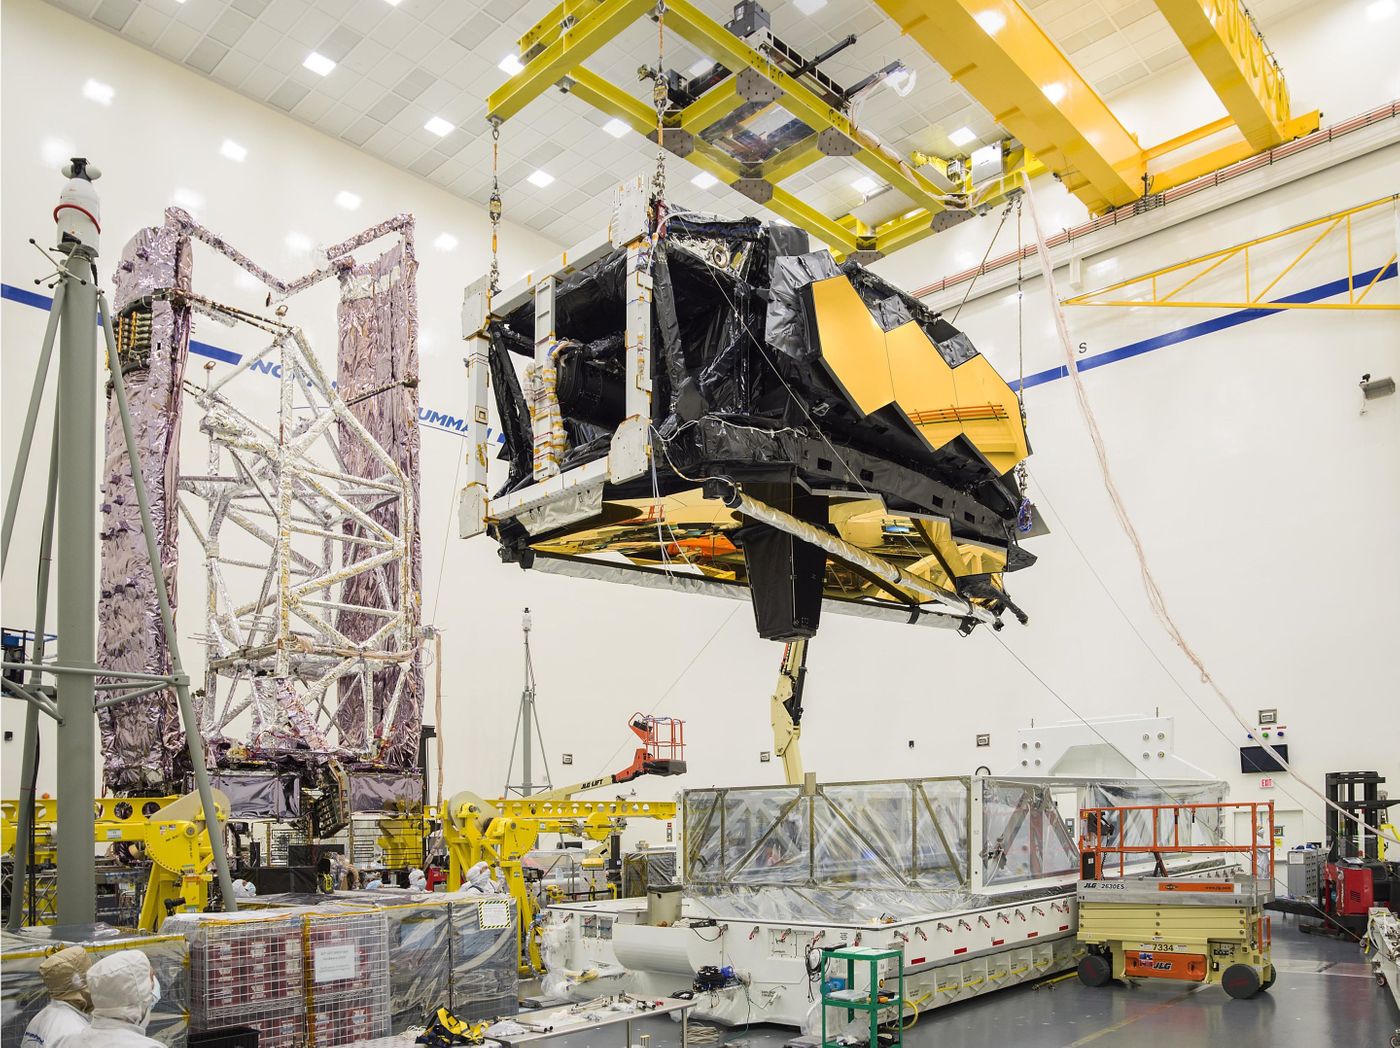 Engineers hoist the heart of the James Webb Space Telescope out of its shipping container at its final testing facility in California.